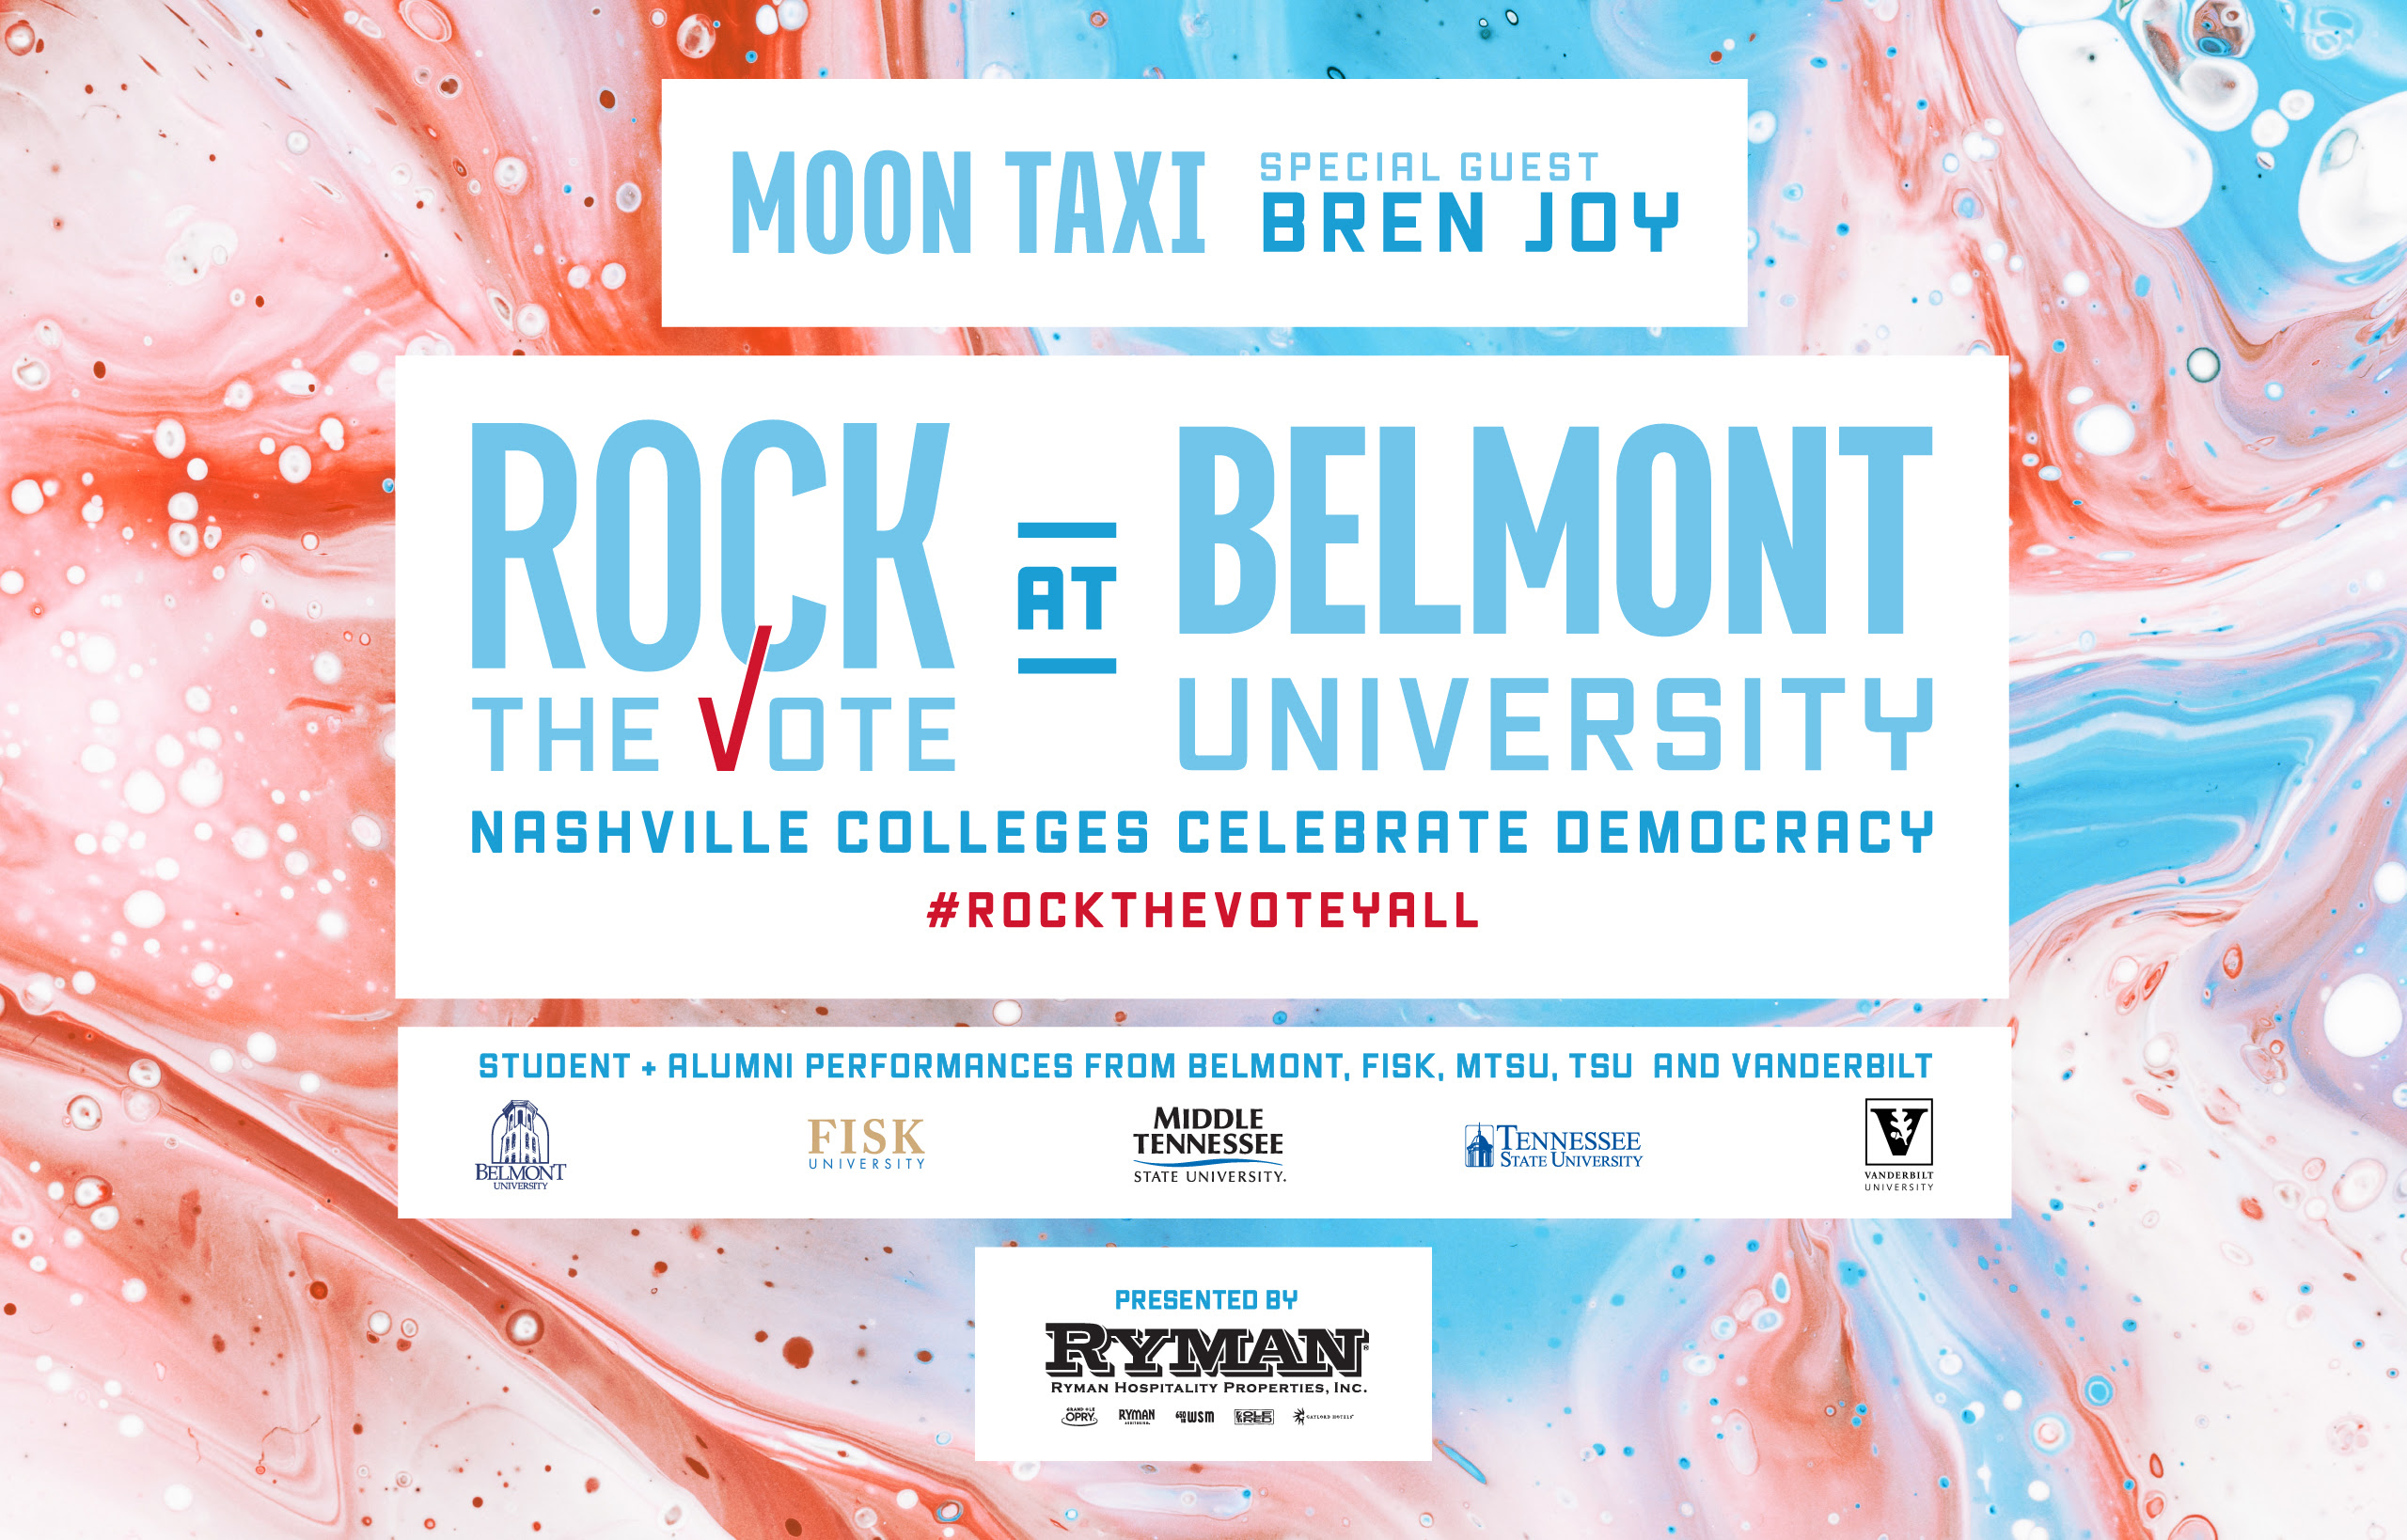 ‘Rock the Vote at Belmont University’ Set for Sept. 22 With Headliner Moon Taxi